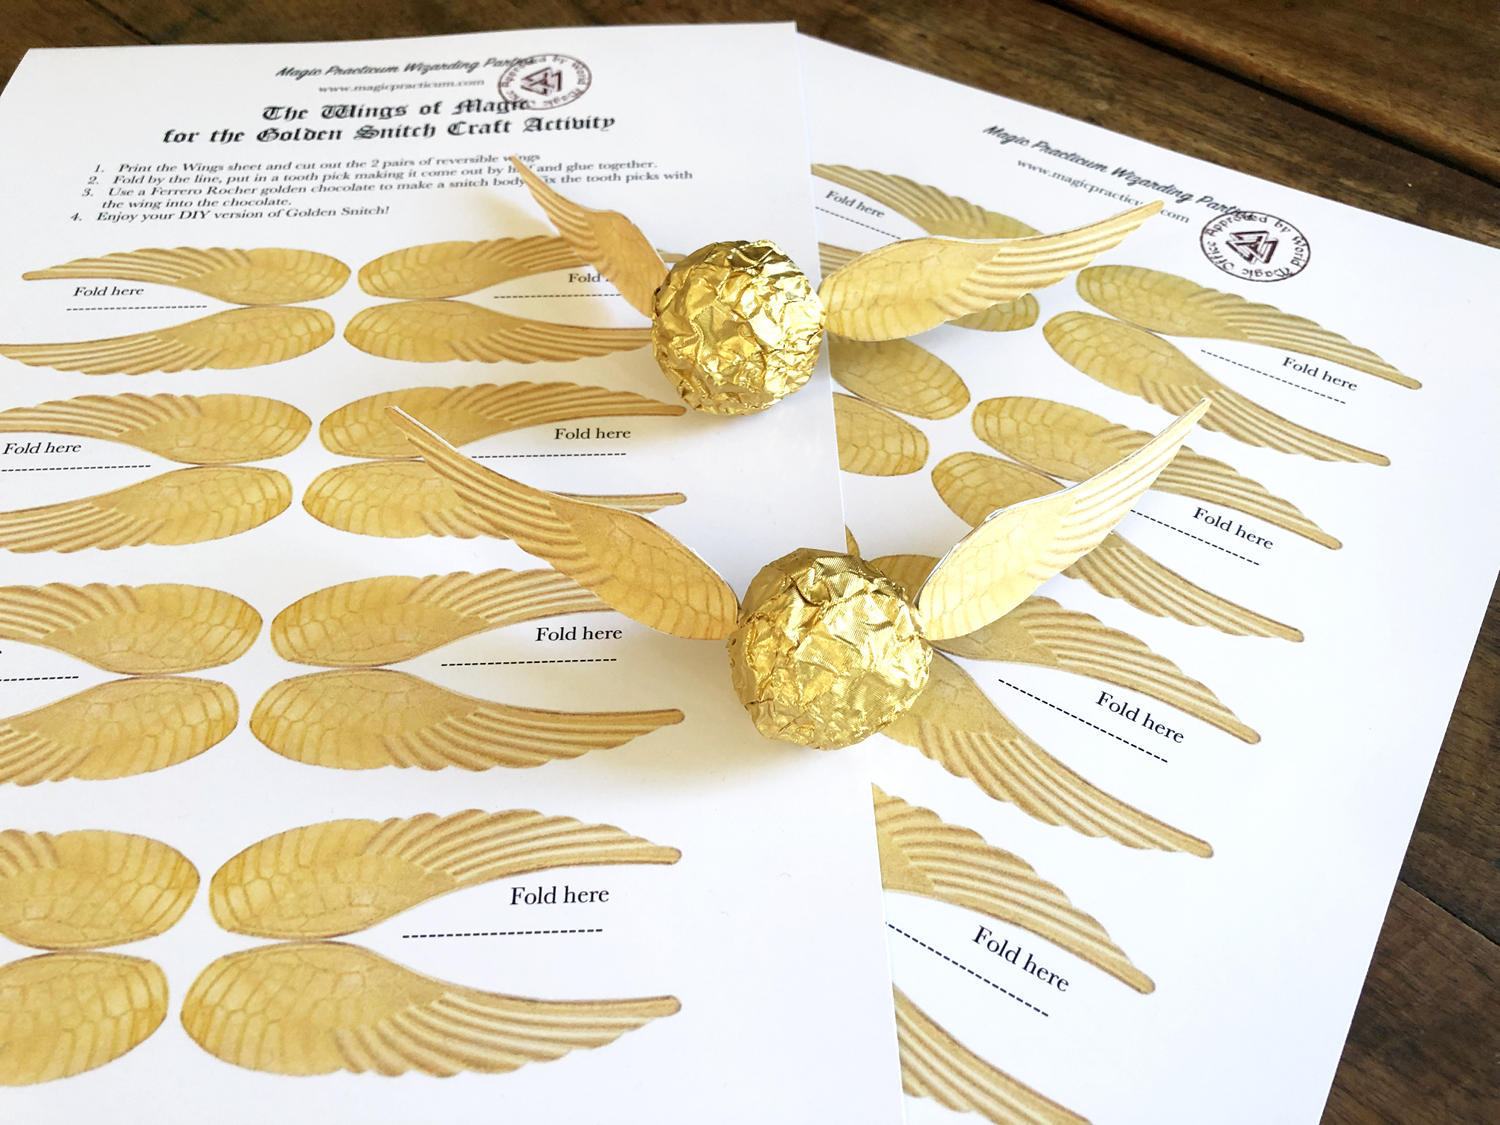 2 golden snitches made from Ferrero Rocher chocolate lying on pages of printable golden wings for snitches